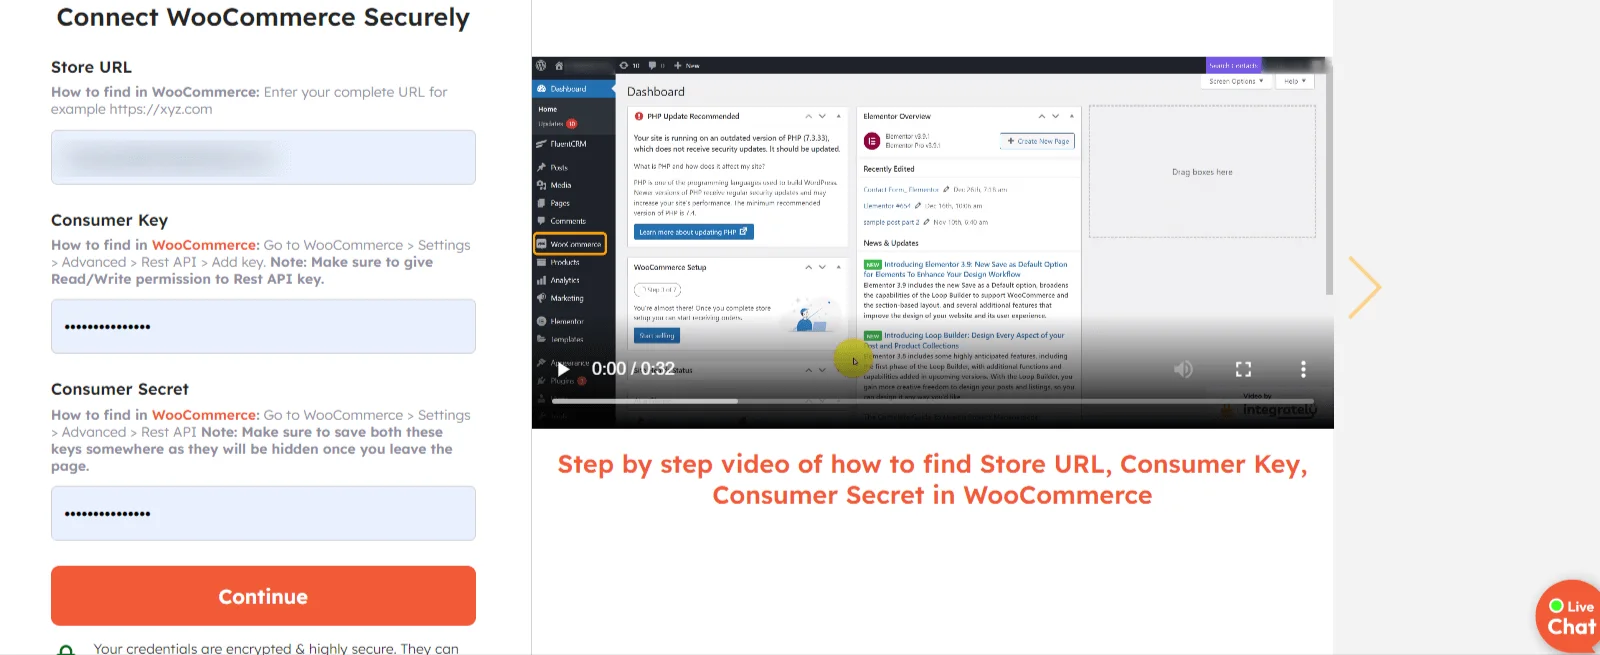 WooCommerce Connect